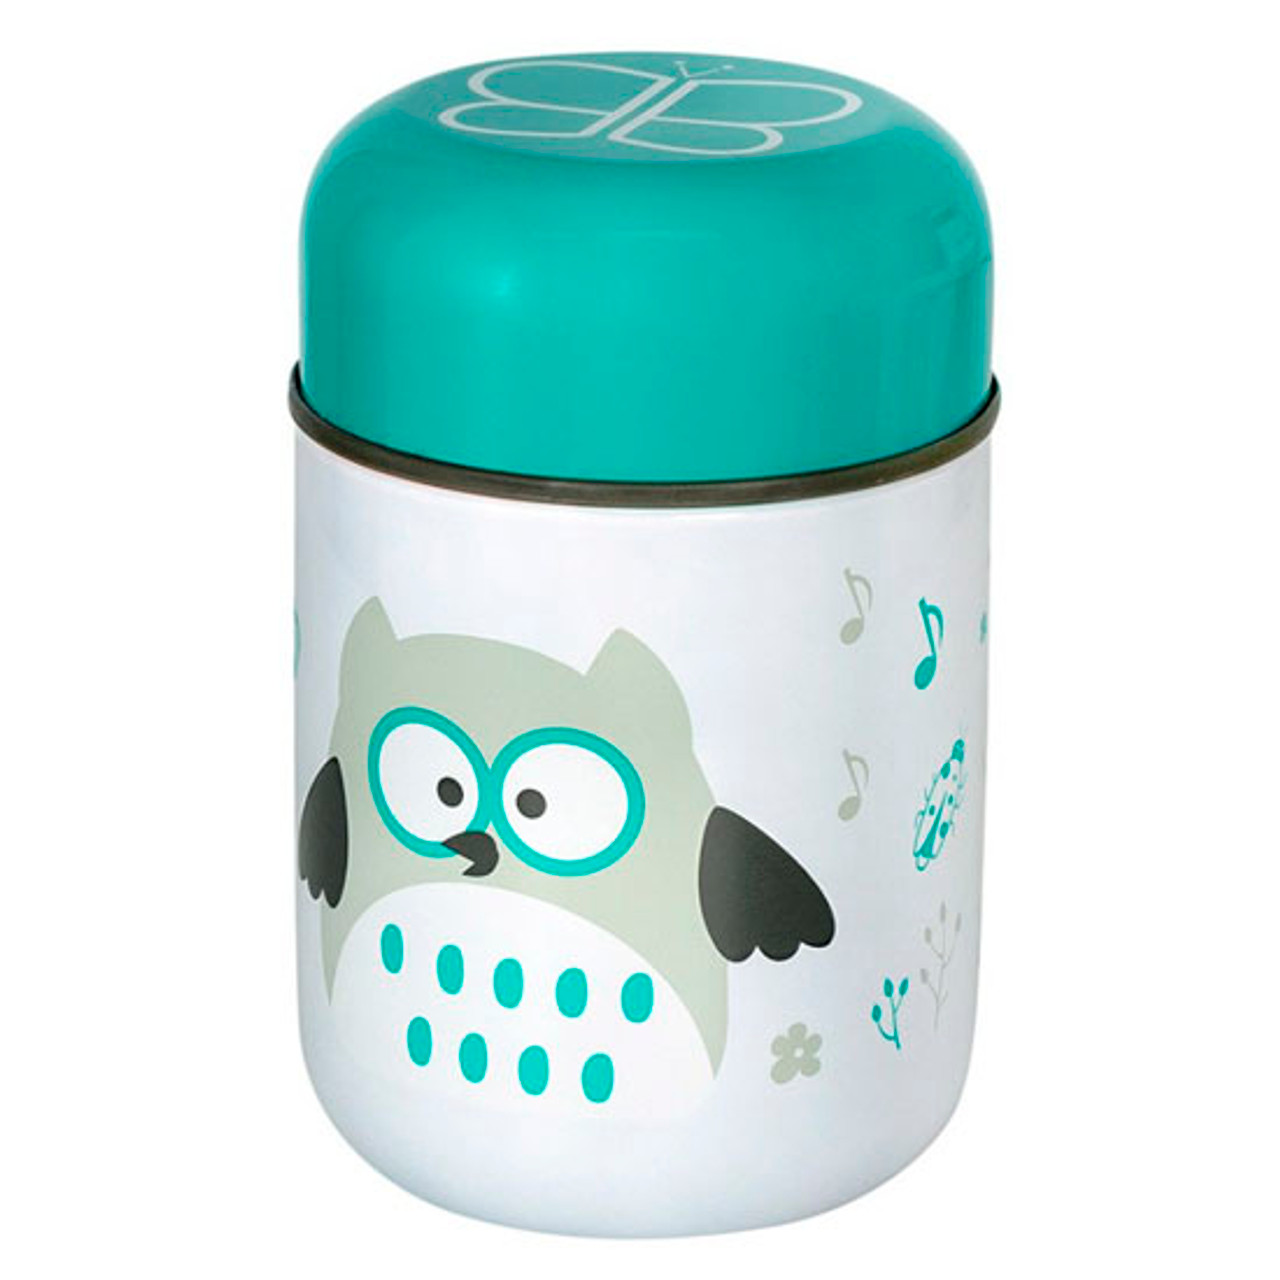 https://cdn11.bigcommerce.com/s-i5bfgn4cvl/images/stencil/1280x1280/products/20276/107981/bbluv-food-insulated-containter-spoon-lime-owl-main_copy__28839.1573780060.jpg?c=2